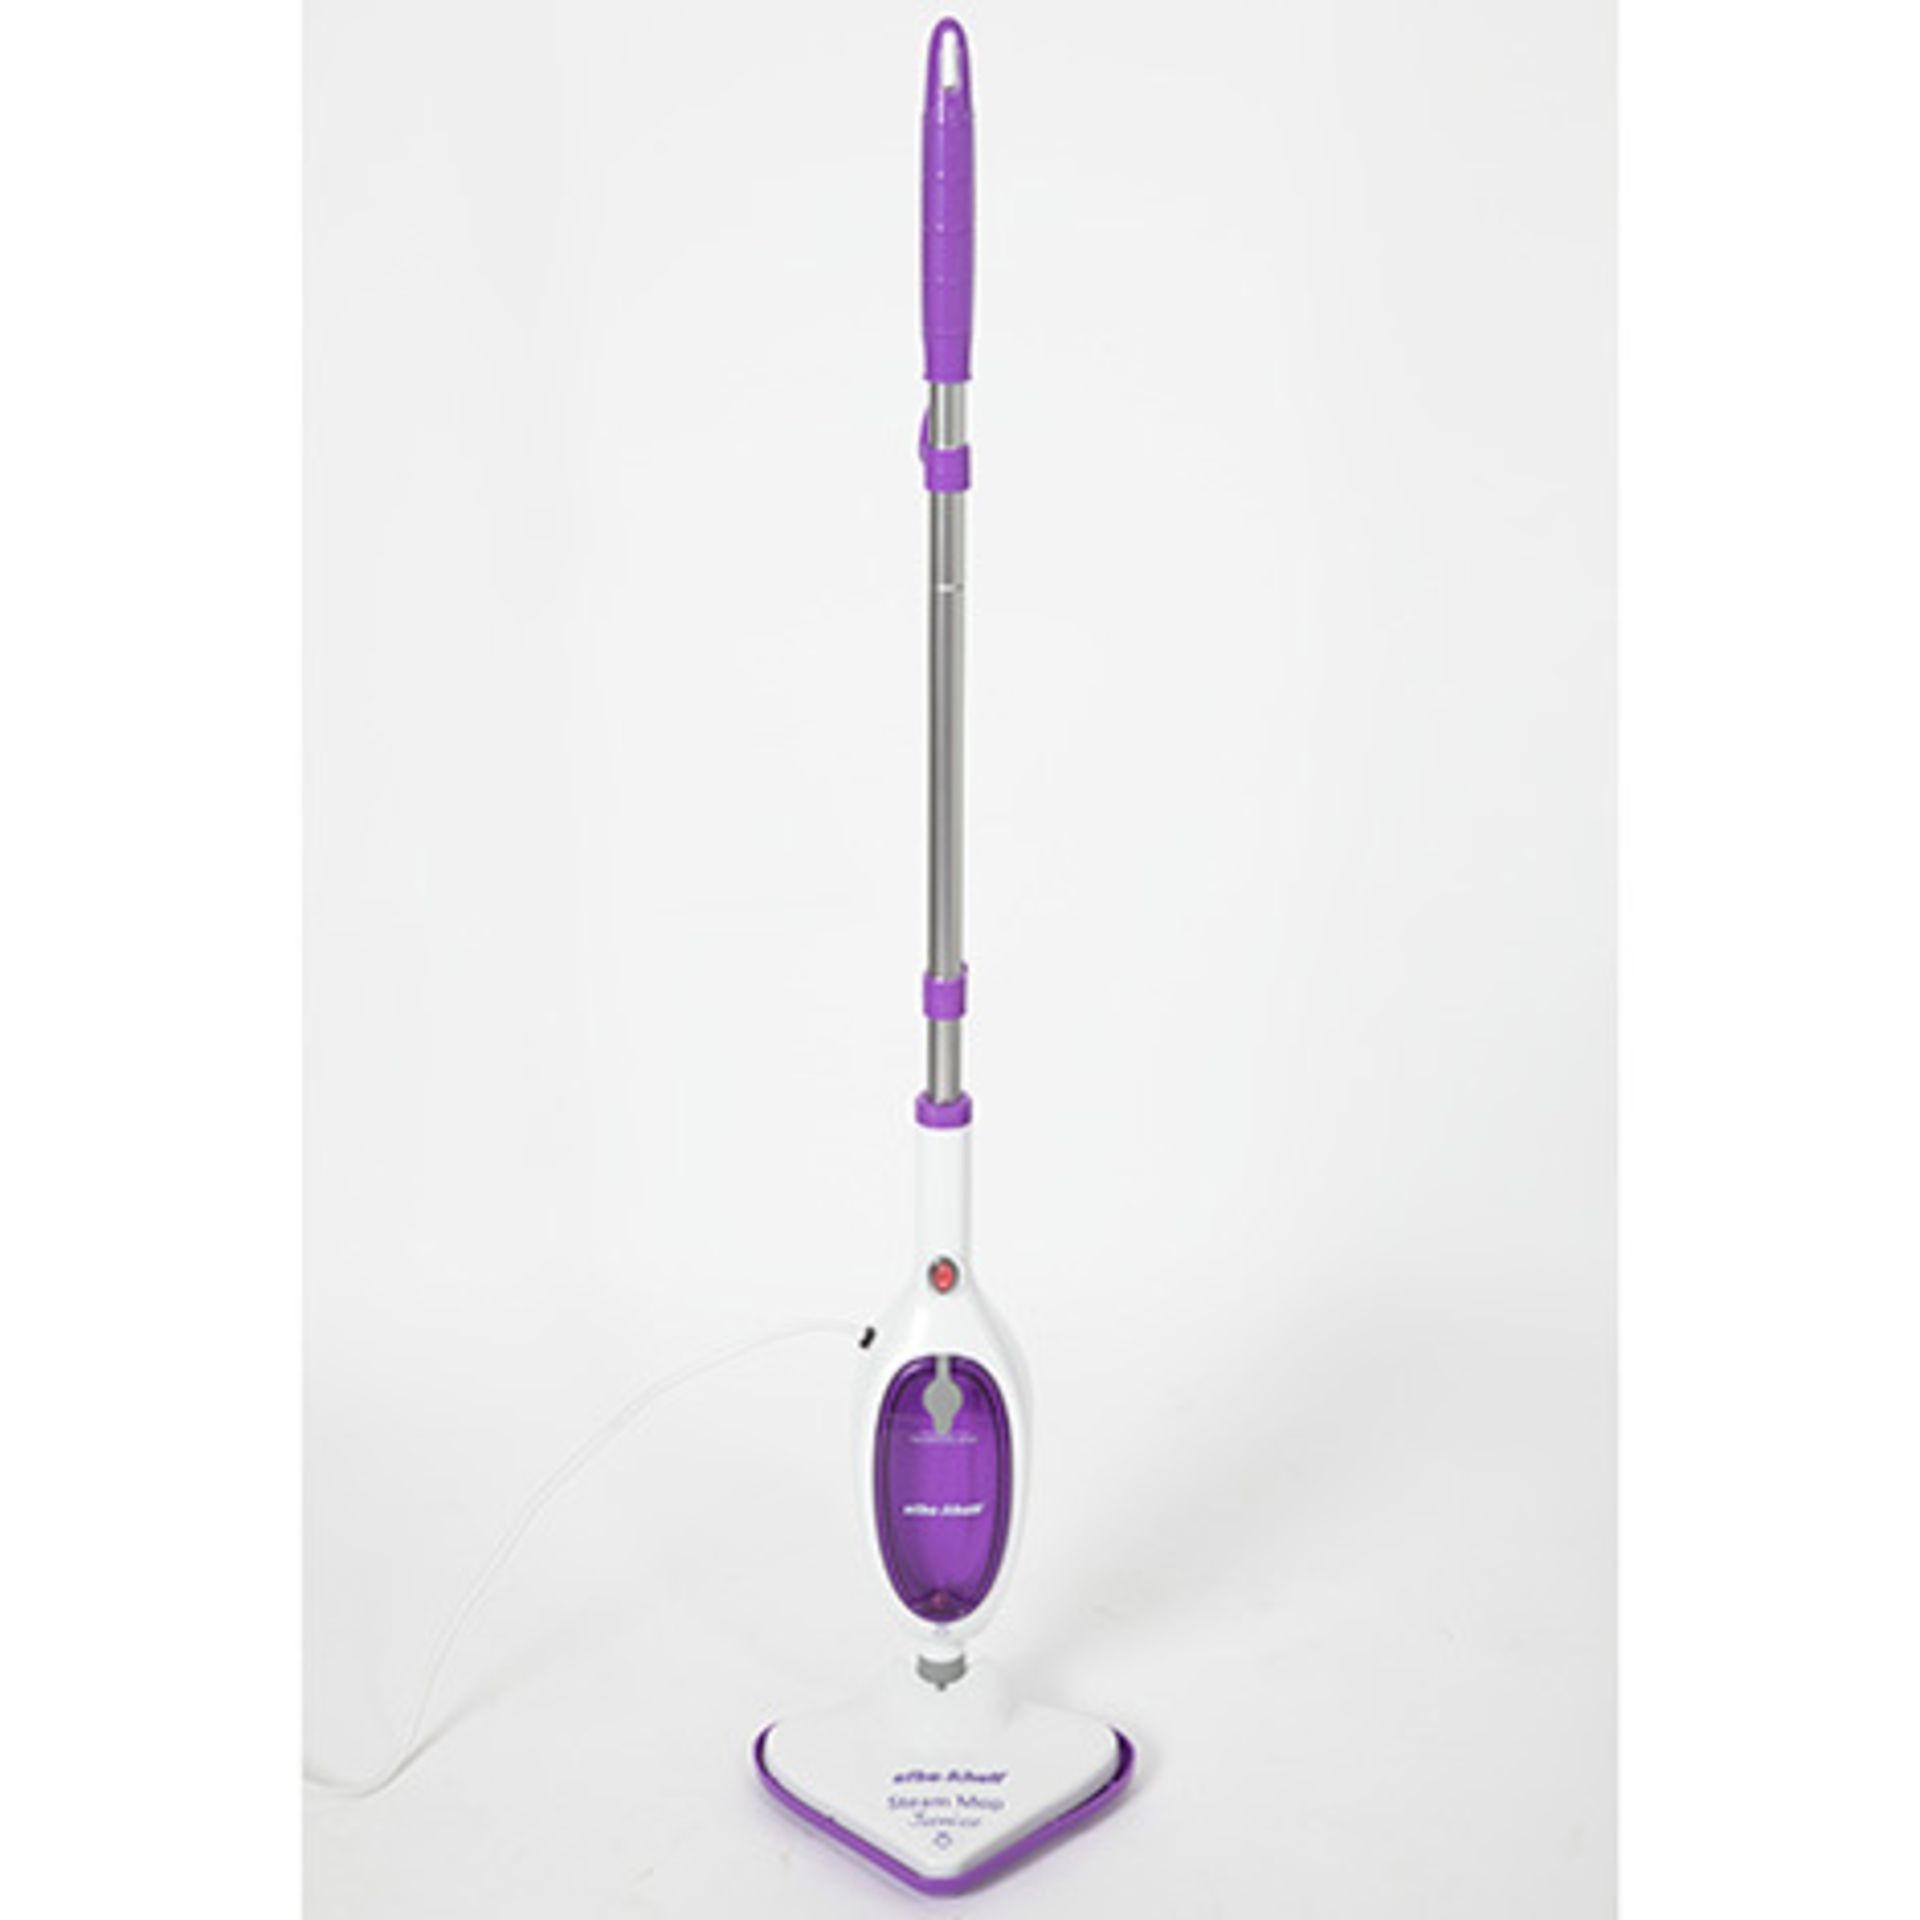 V Brand New Efbe-Schott Steam Mop (New And Boxed) Colours And Model May Vary RRP59.99 X 2 Bid - Image 2 of 2